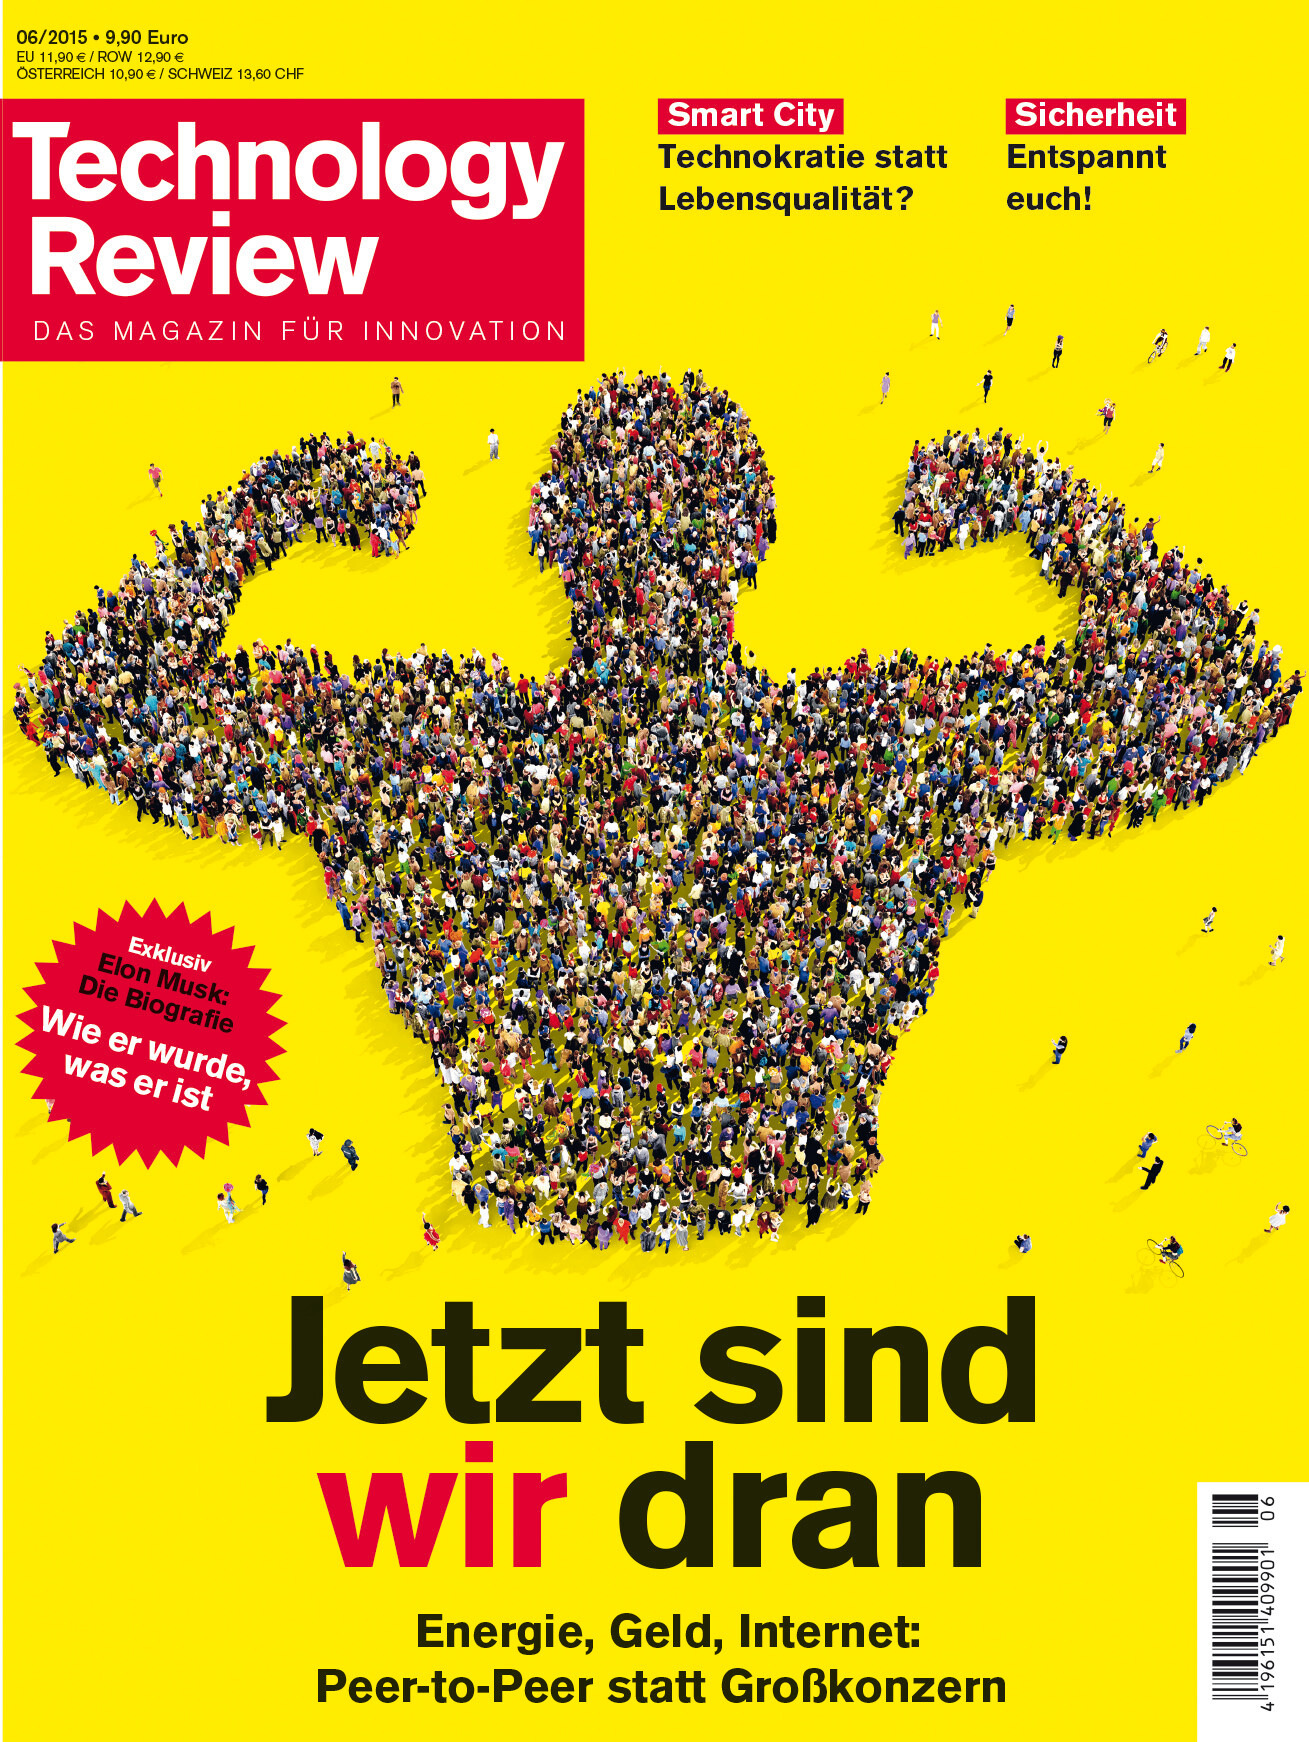 Technology Review 06/2015